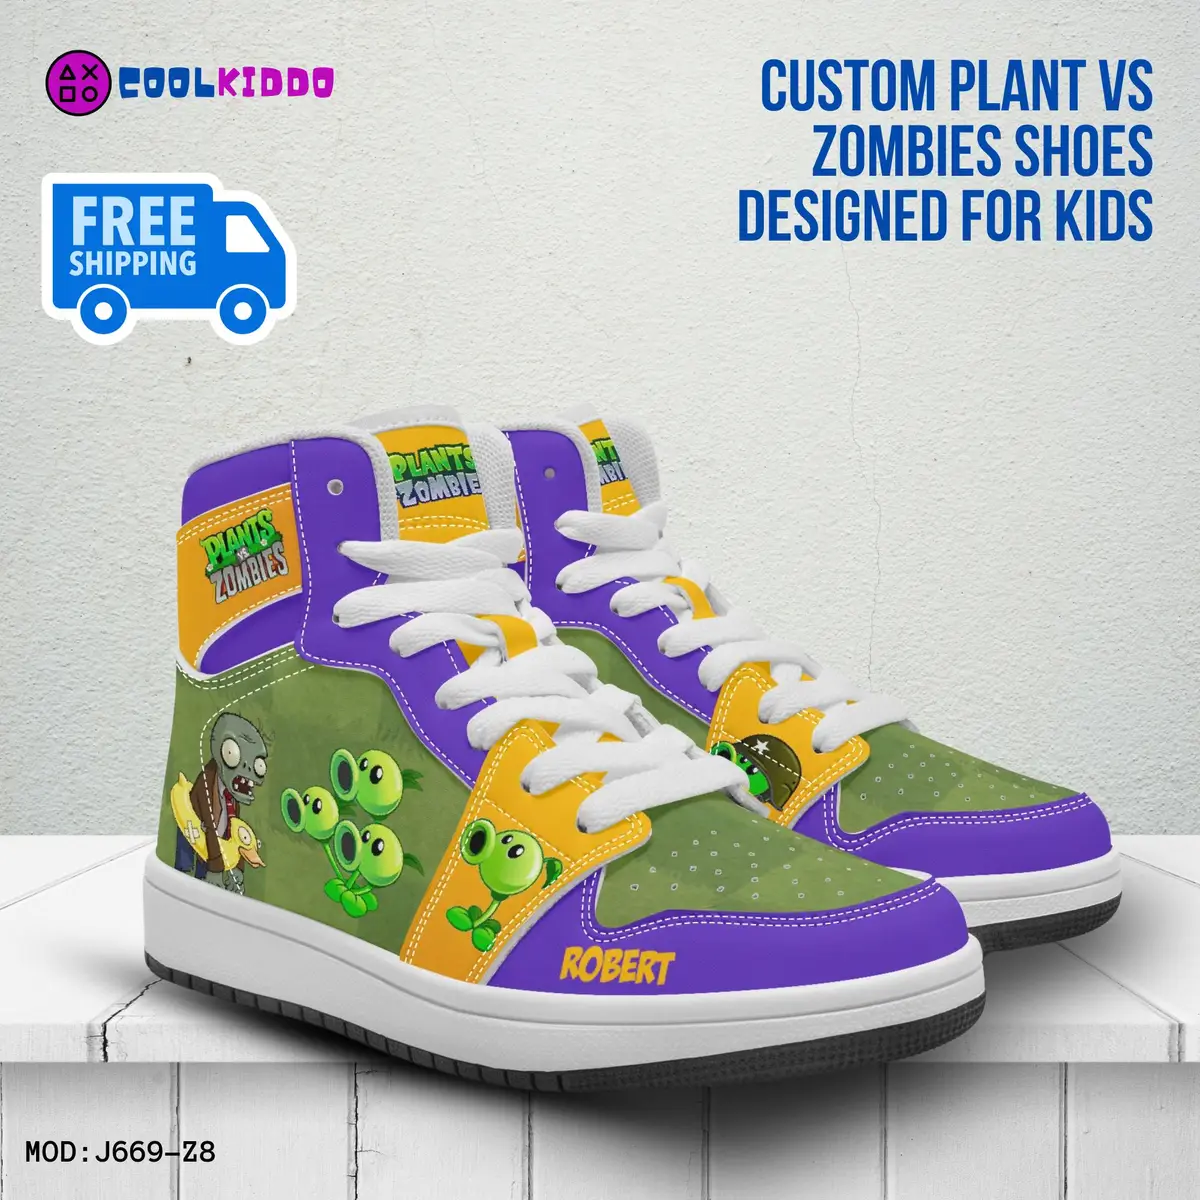 Personalized Plants vs Zombies Characters High-Top Leather Sneakers – Jordans Style Shoes Cool Kiddo 10